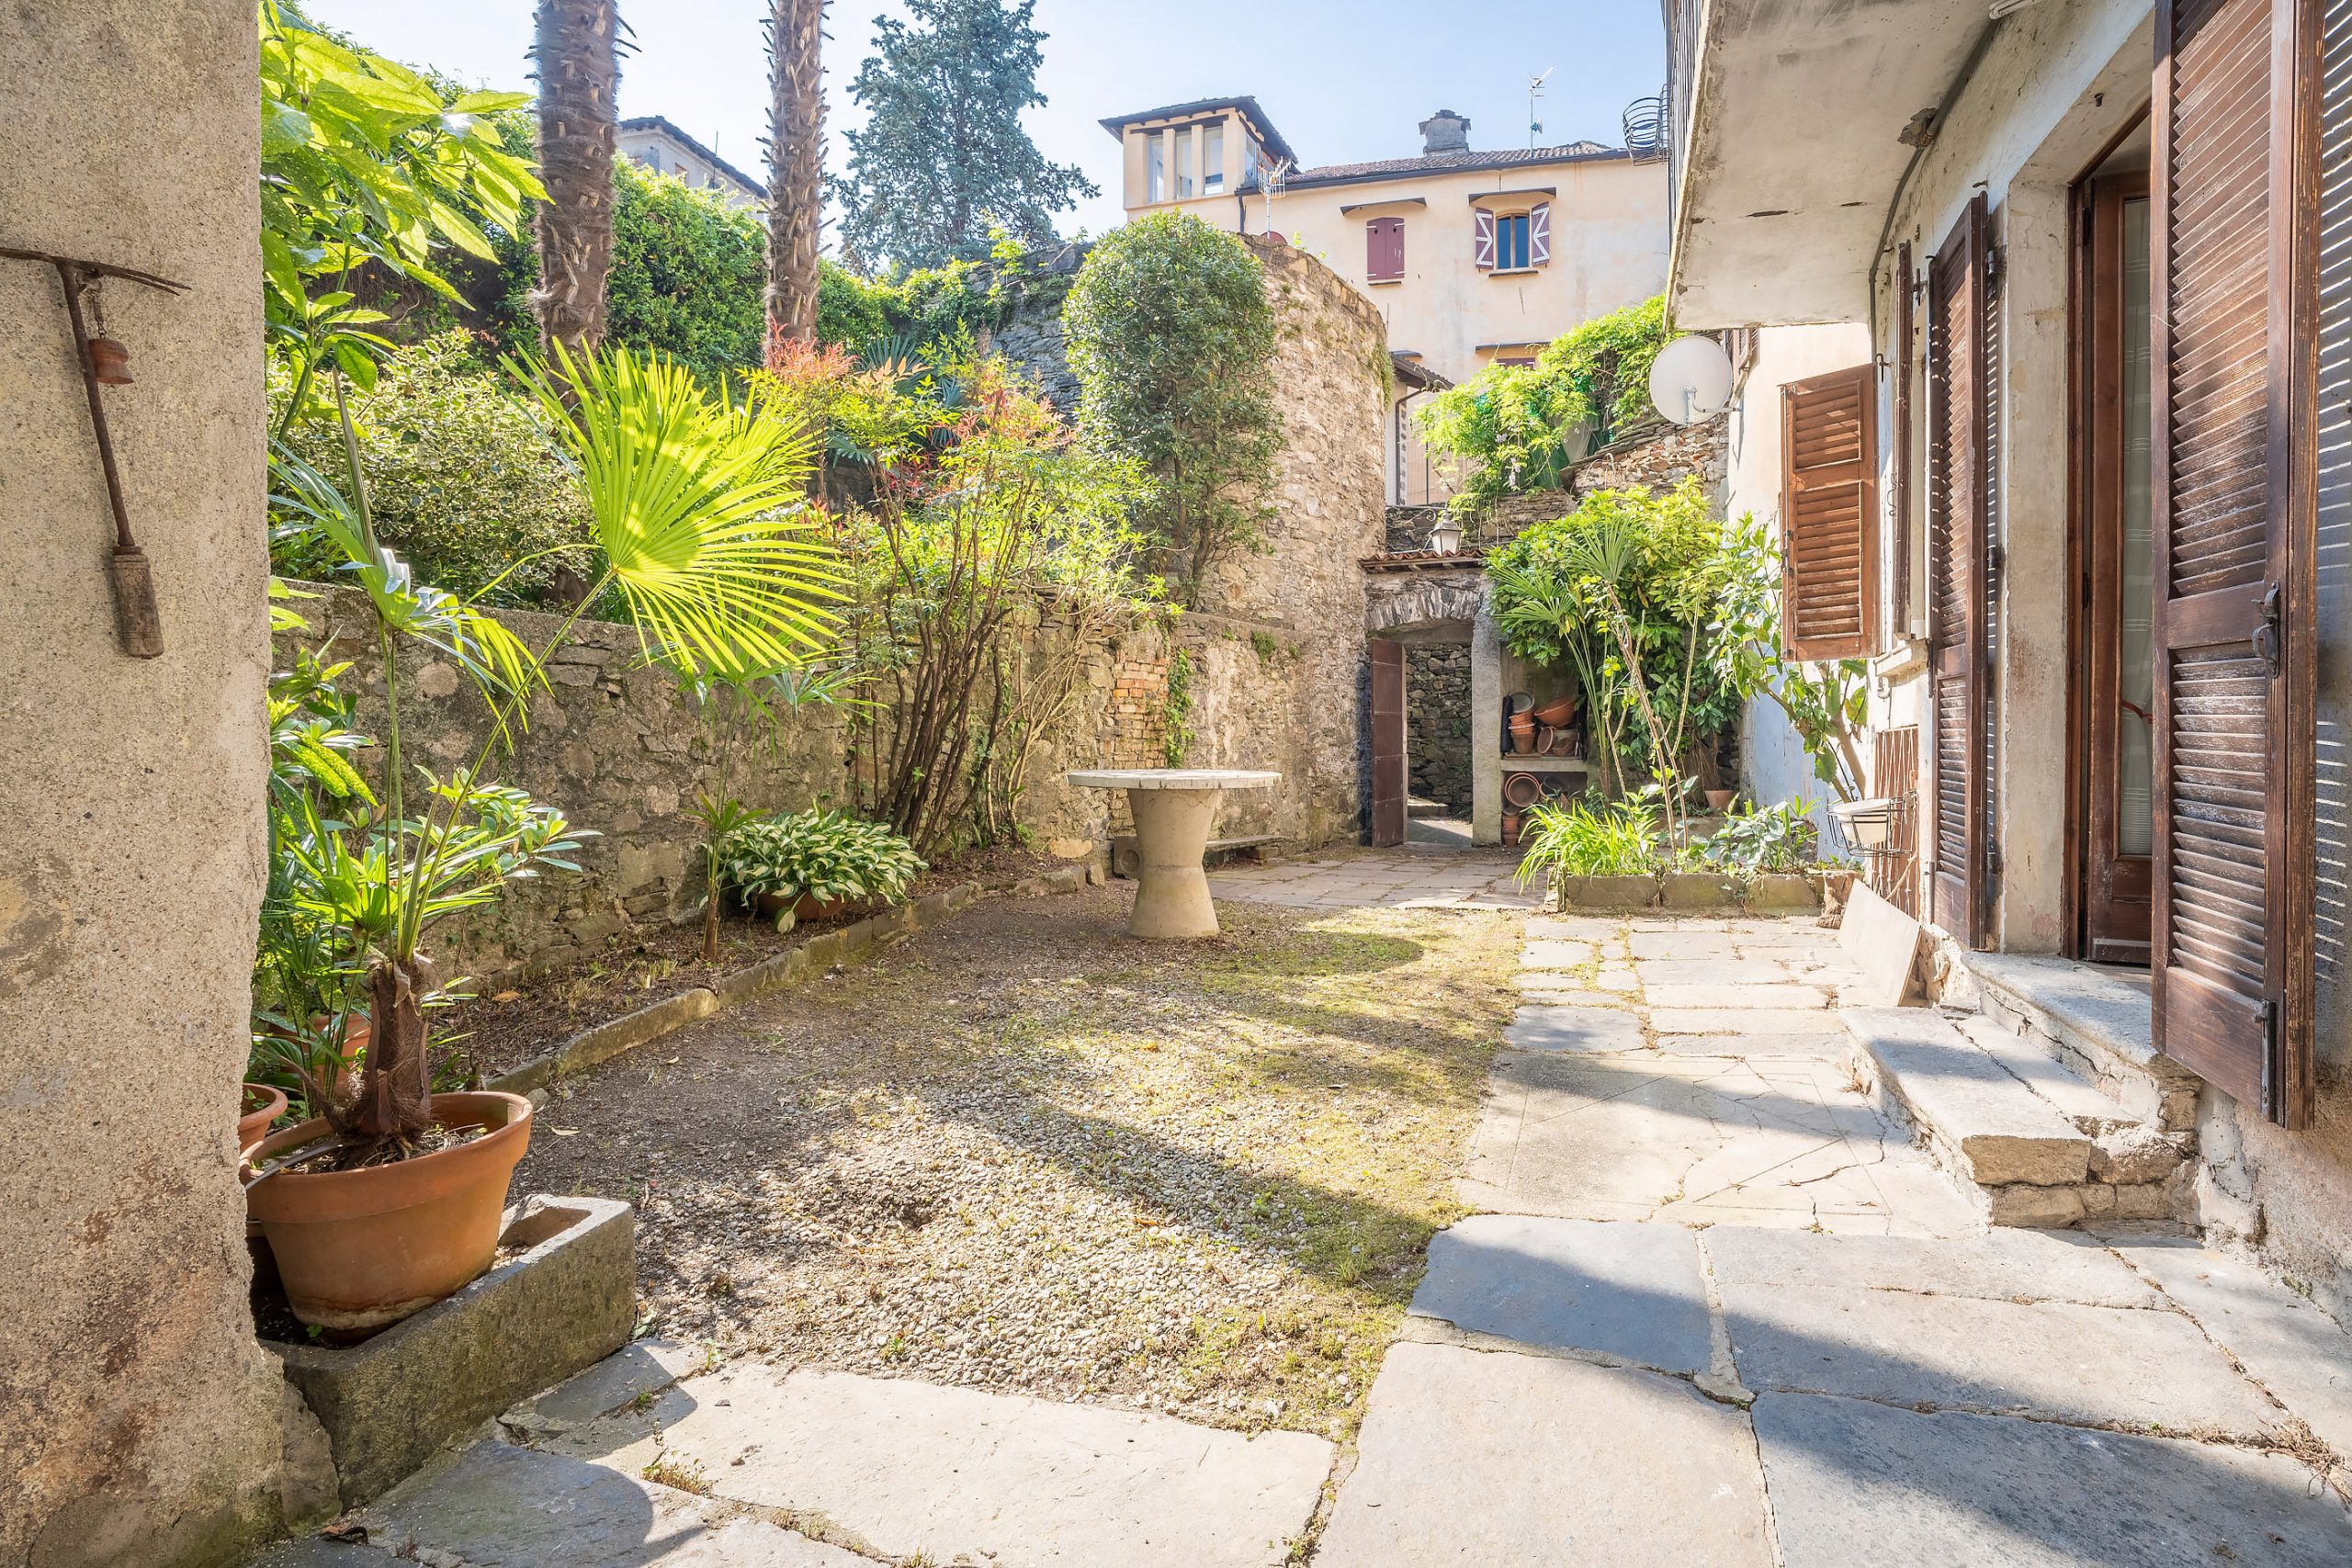 ORTA Historic home in the town center with private courtyard